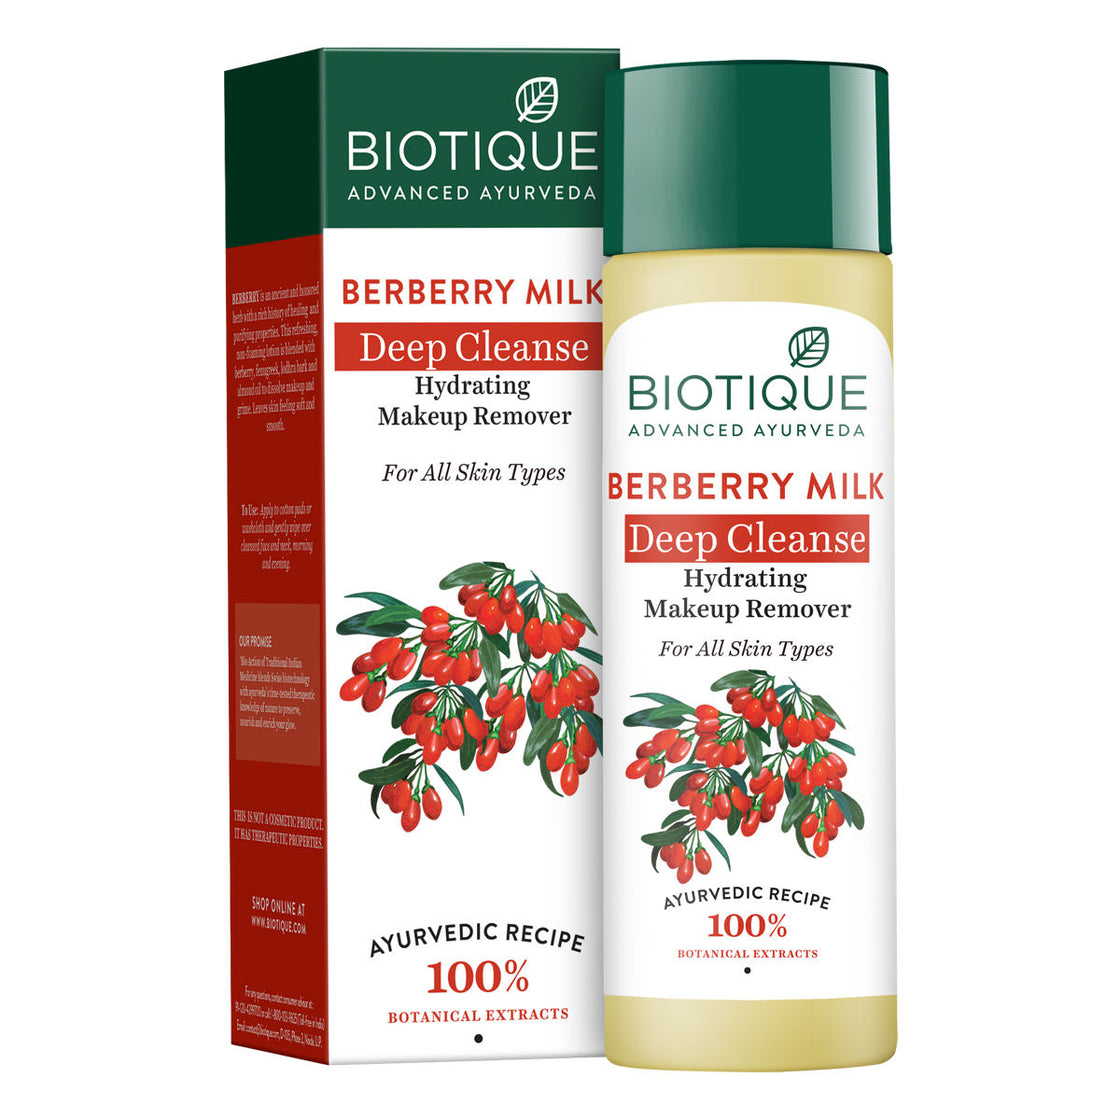 Biotique Berberry Milk Deep Cleanse Hydrating Makeup Remover (120Ml)